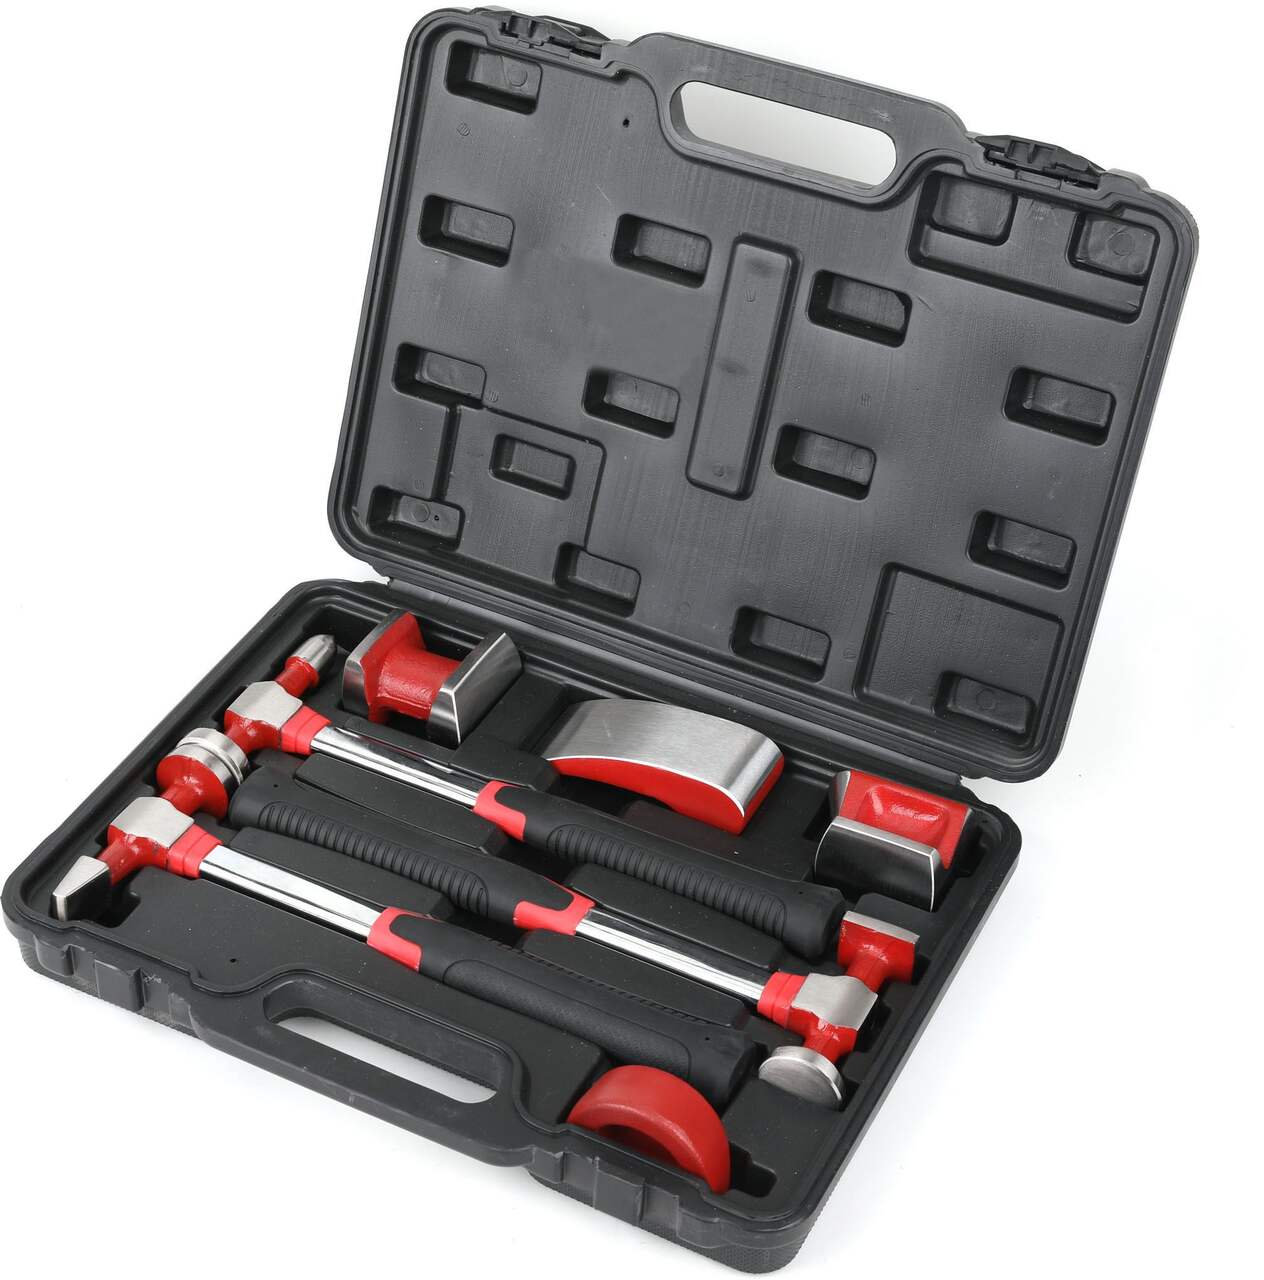 SWANLAKE 7 Piece Auto Body Repair Kit, Auto Body Tools, Auto Body Repair  Tools with Carbon Steel Hammer Heads